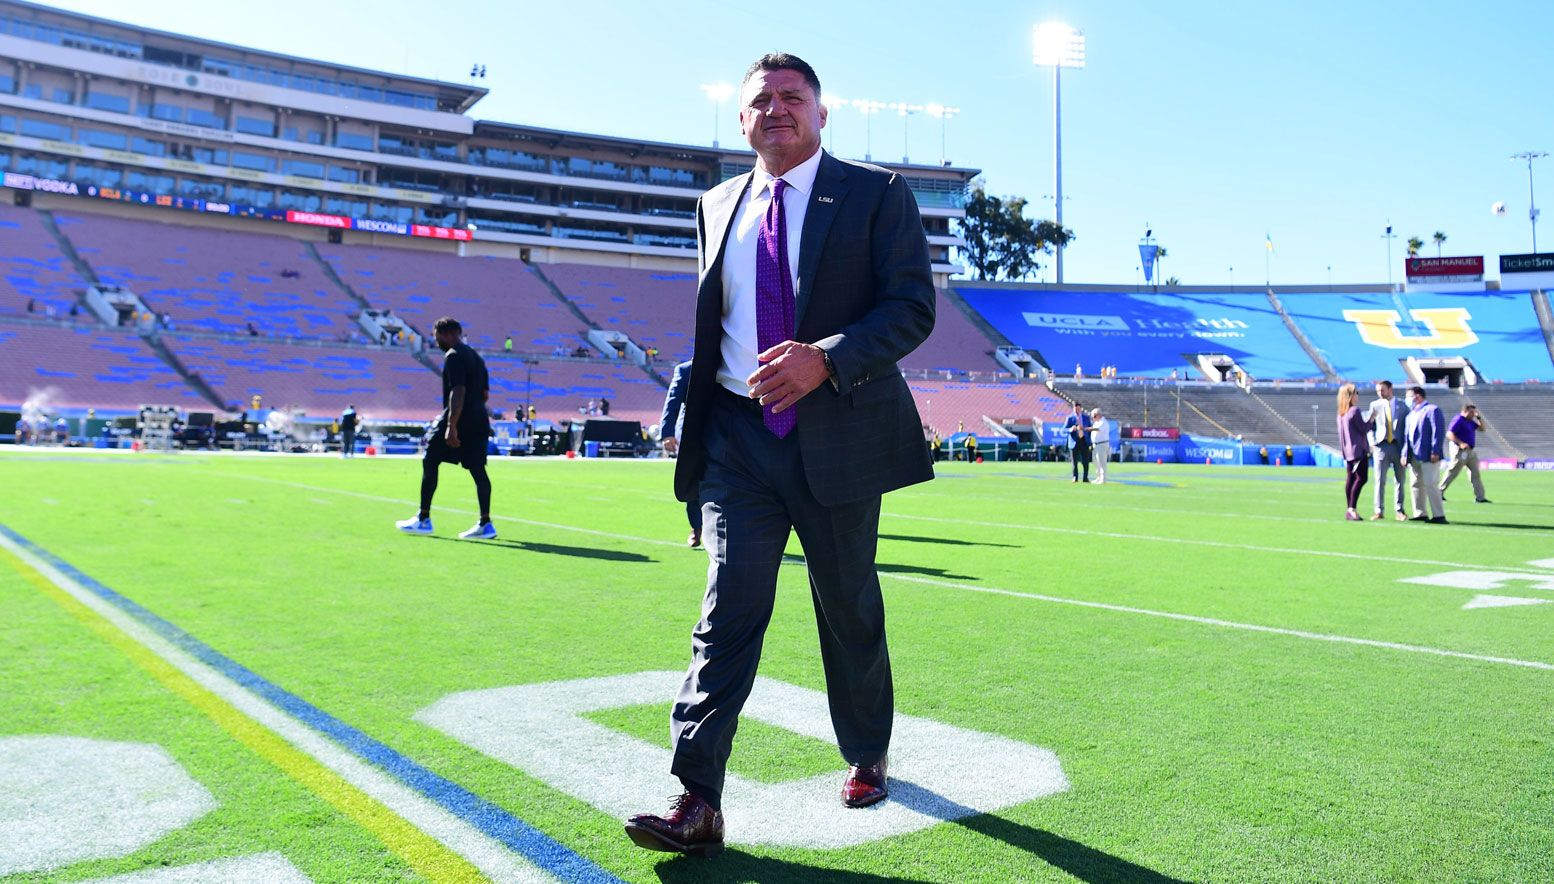 Ed Orgeron on the sideline in the game against UCLA